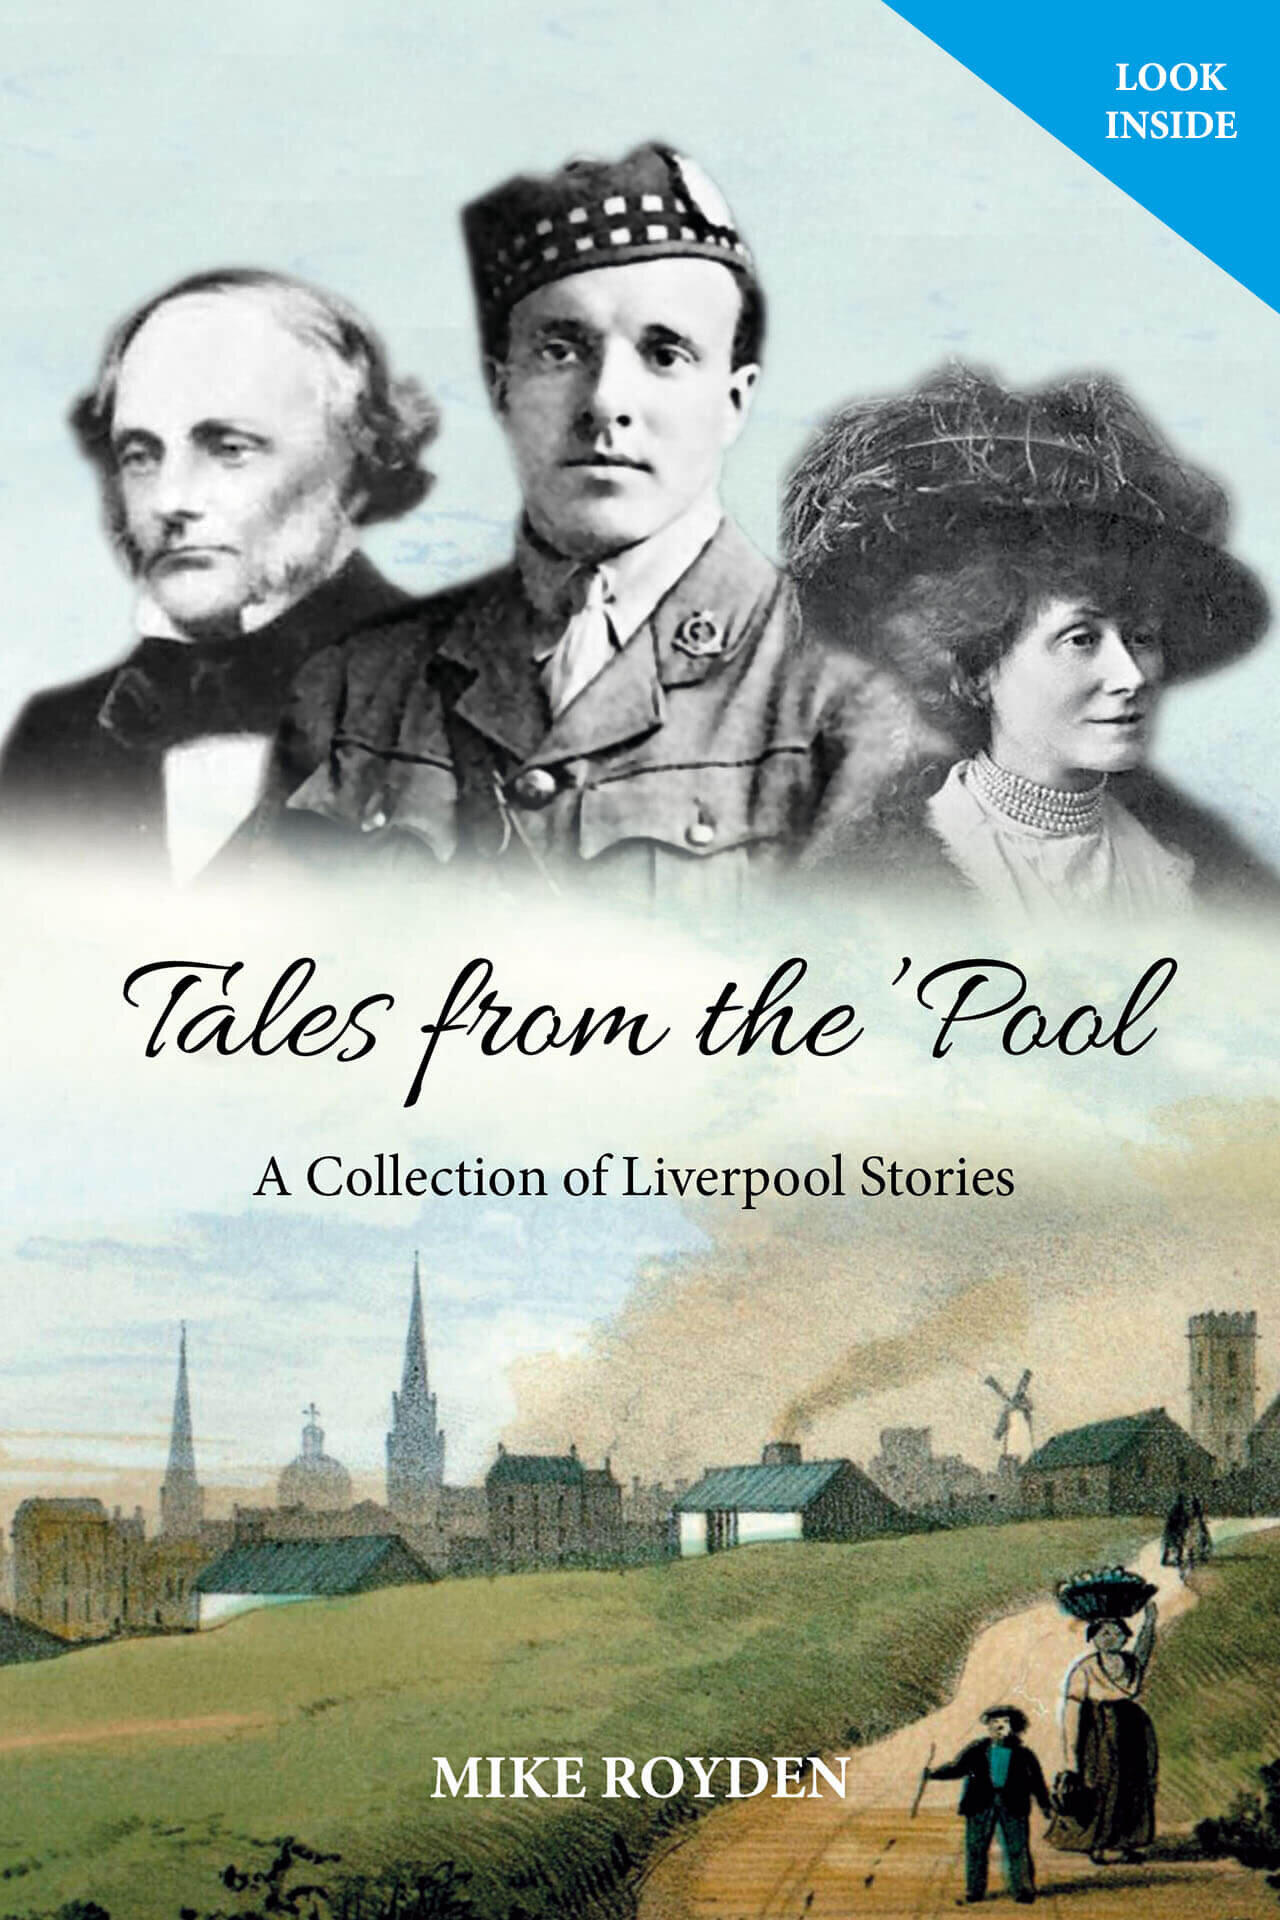 Tales from the Pool A Collection of Liverpool Stories by Mike Royden